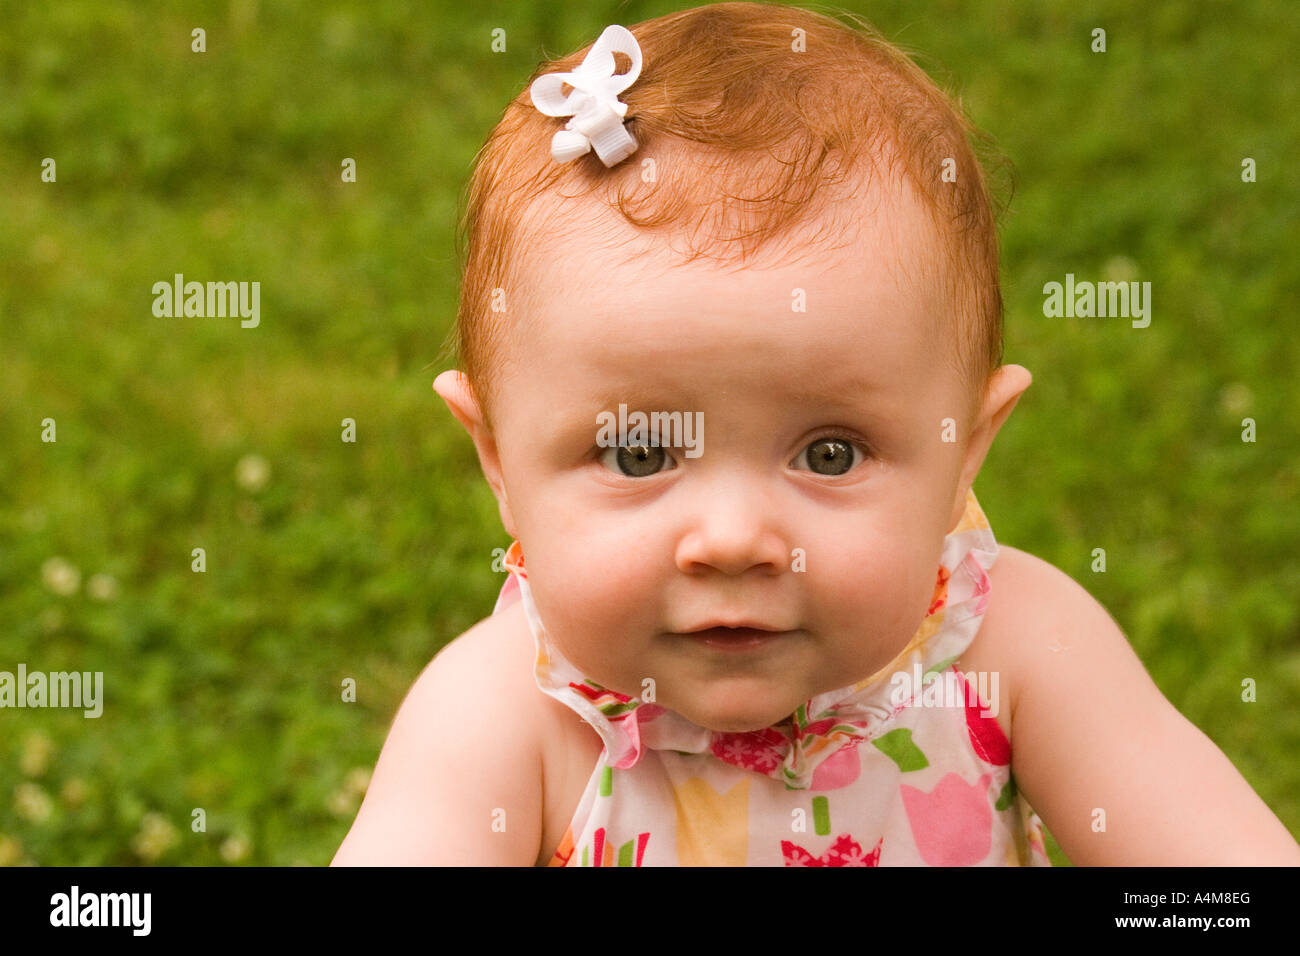 An appealing baby girl with red hair looking at the camera Stock Photo ...